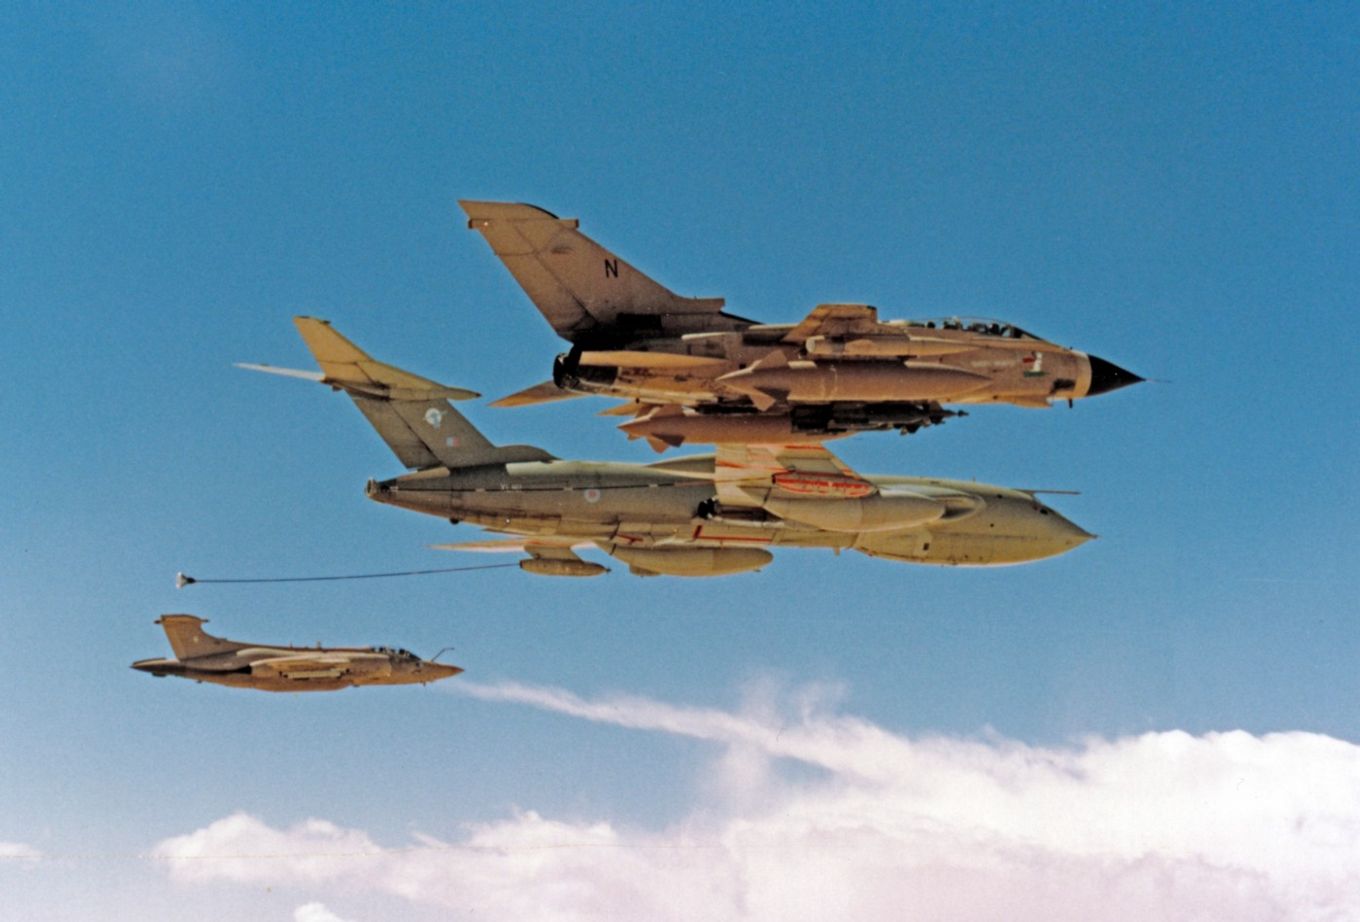 Image shows RAF aircraft flying in formation.